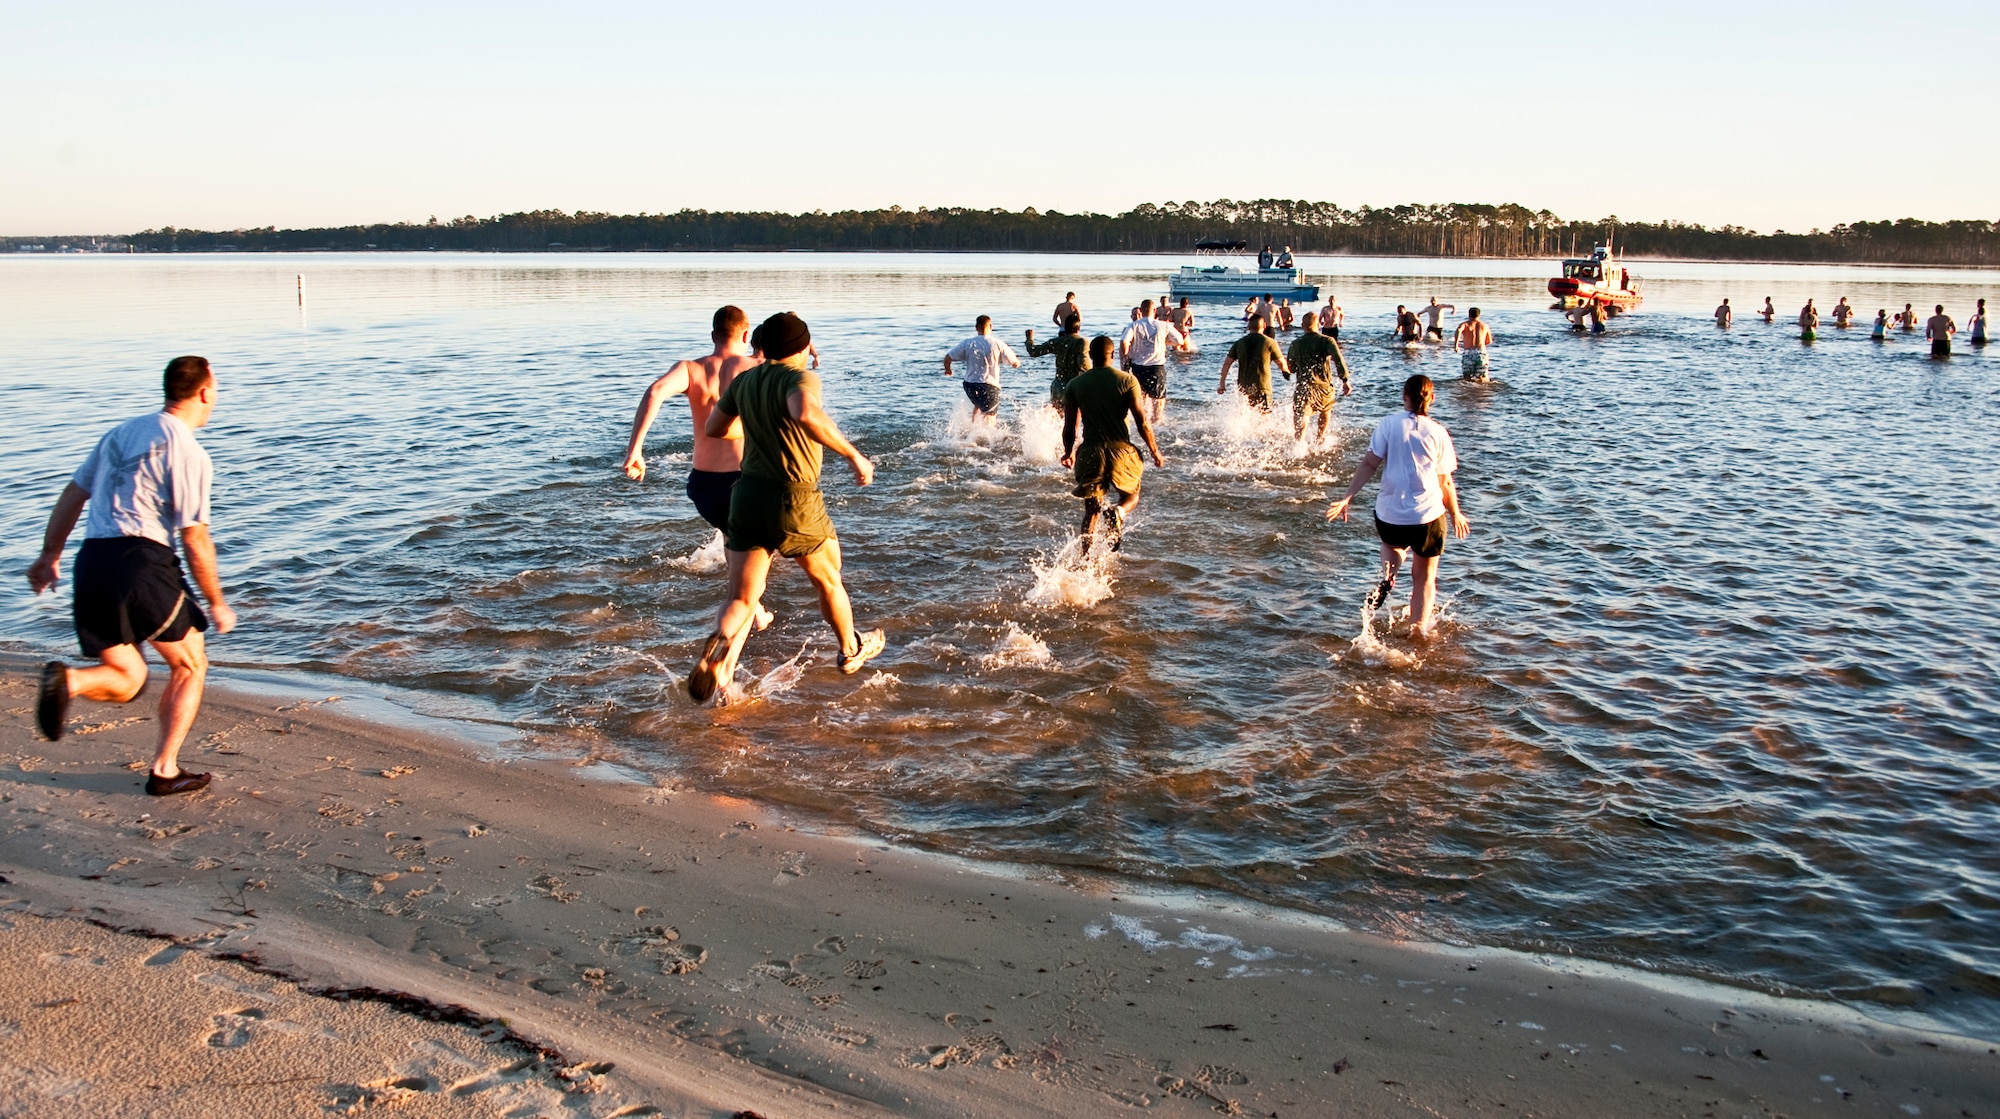 Team Eglin members rush into the chilly waters of Choctawhatchee Bay during Eglin’s first-ever Polar Bear swim, held at Post’l Point, Jan. 7.  More than 100 braved the 34 degree temperatures and took a dip including the 96th Air Base Wing commander and command chief.  (U.S. Air Force photo/Samuel King Jr.)